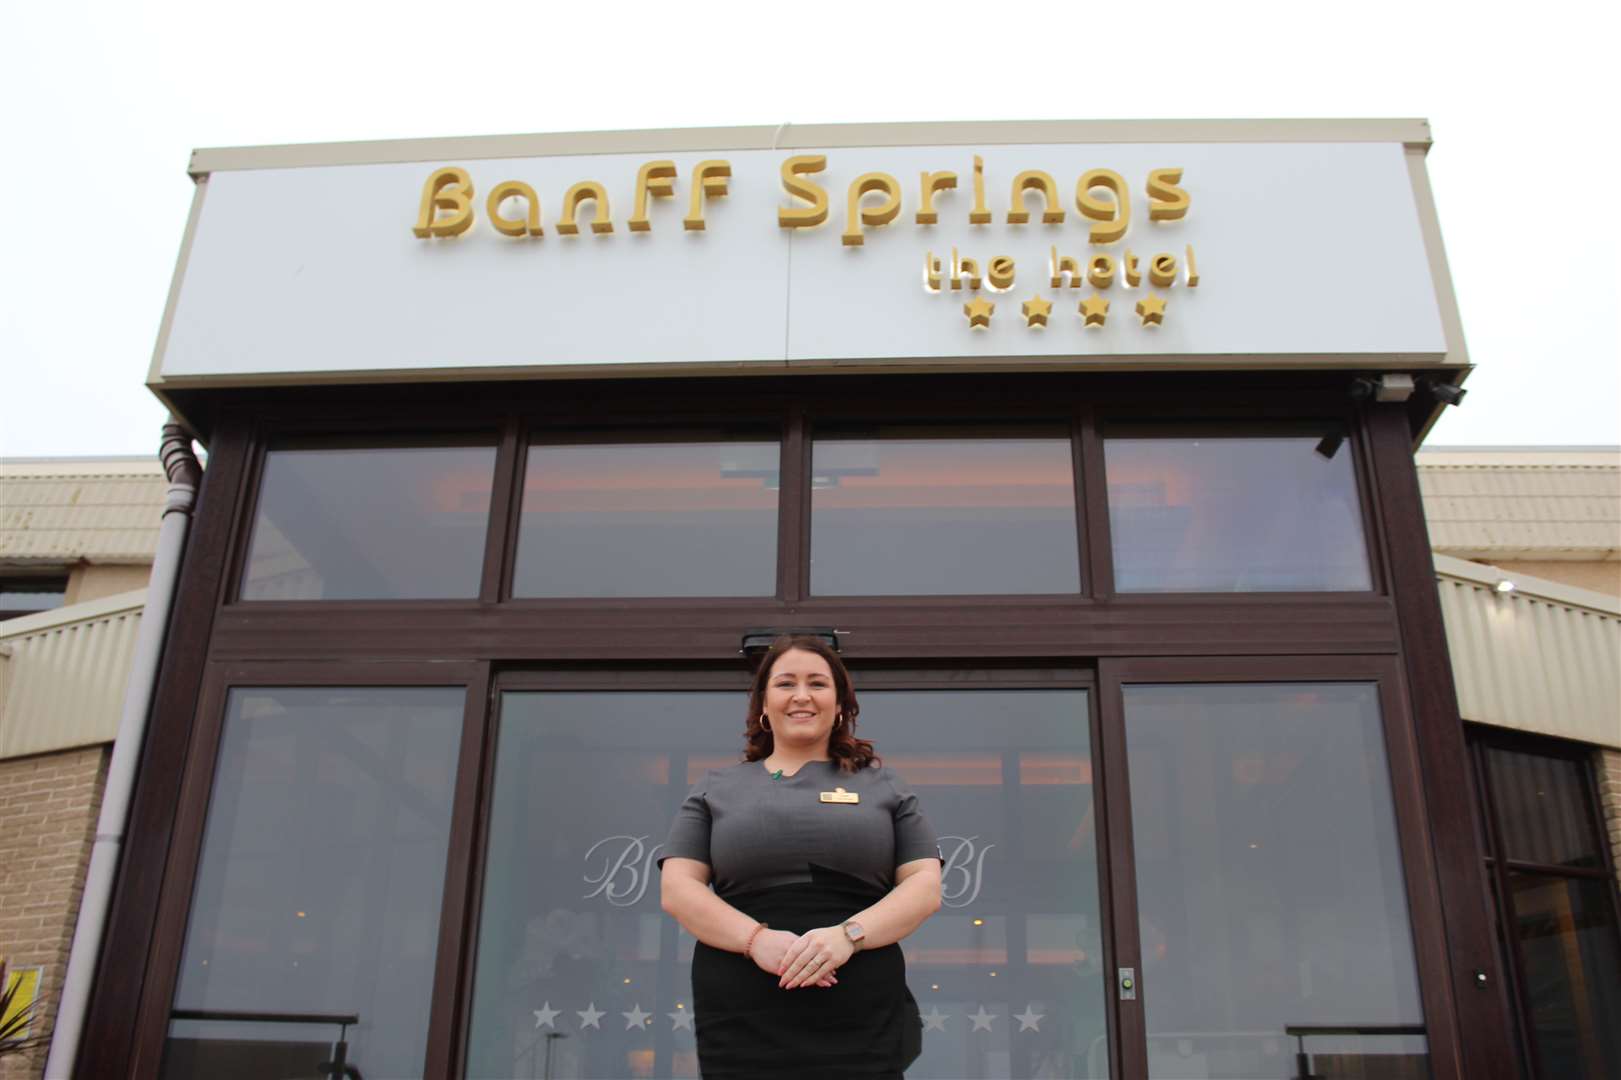 Banff Springs Hotel events manager Sarah Sinclair. Picture: Kyle Ritchie